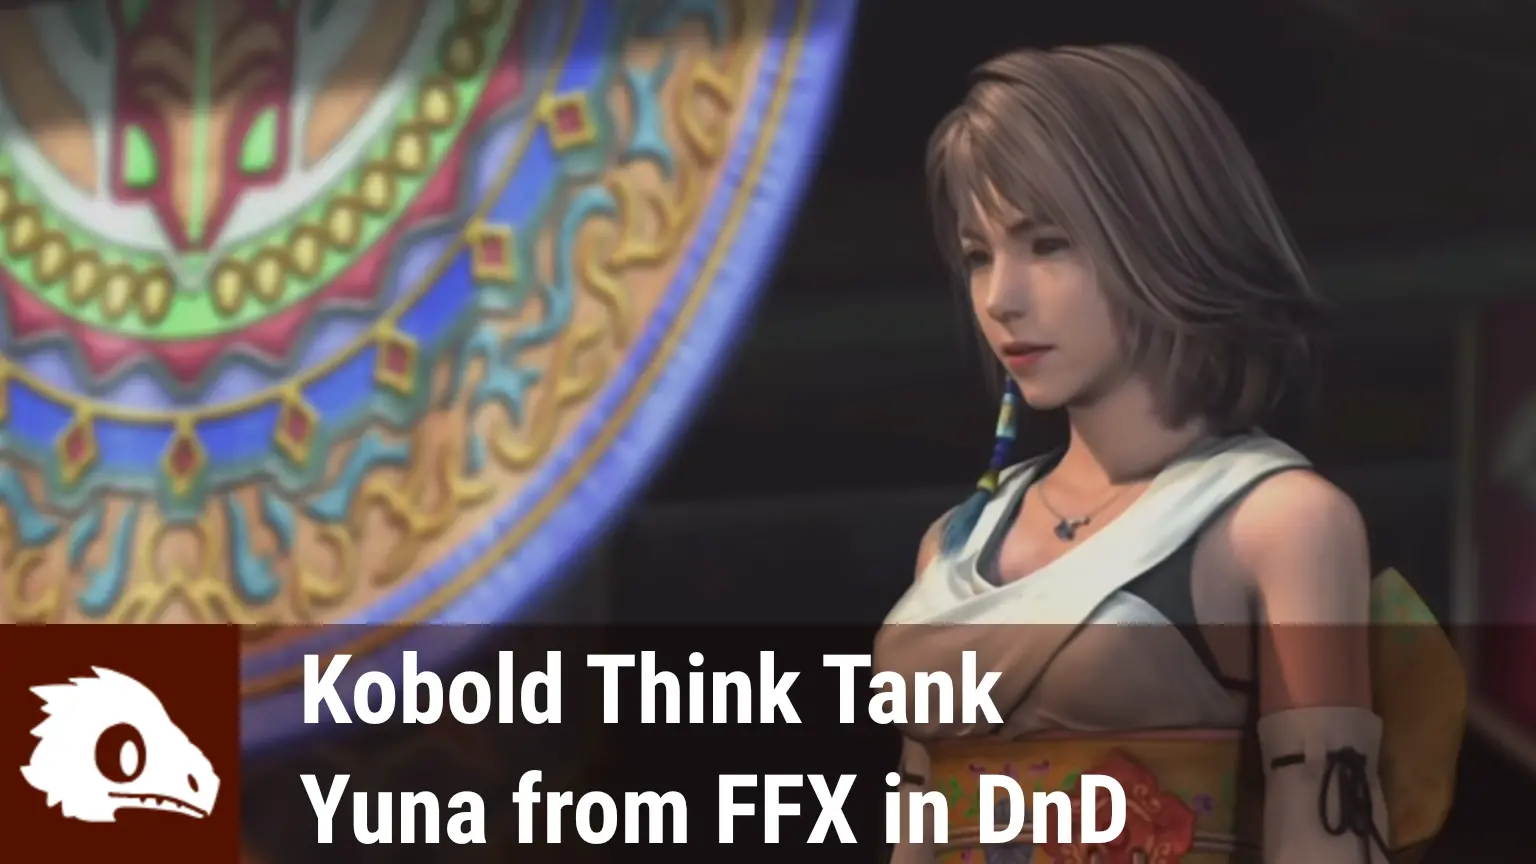 Graphic of Yuna from Final Fantasy X